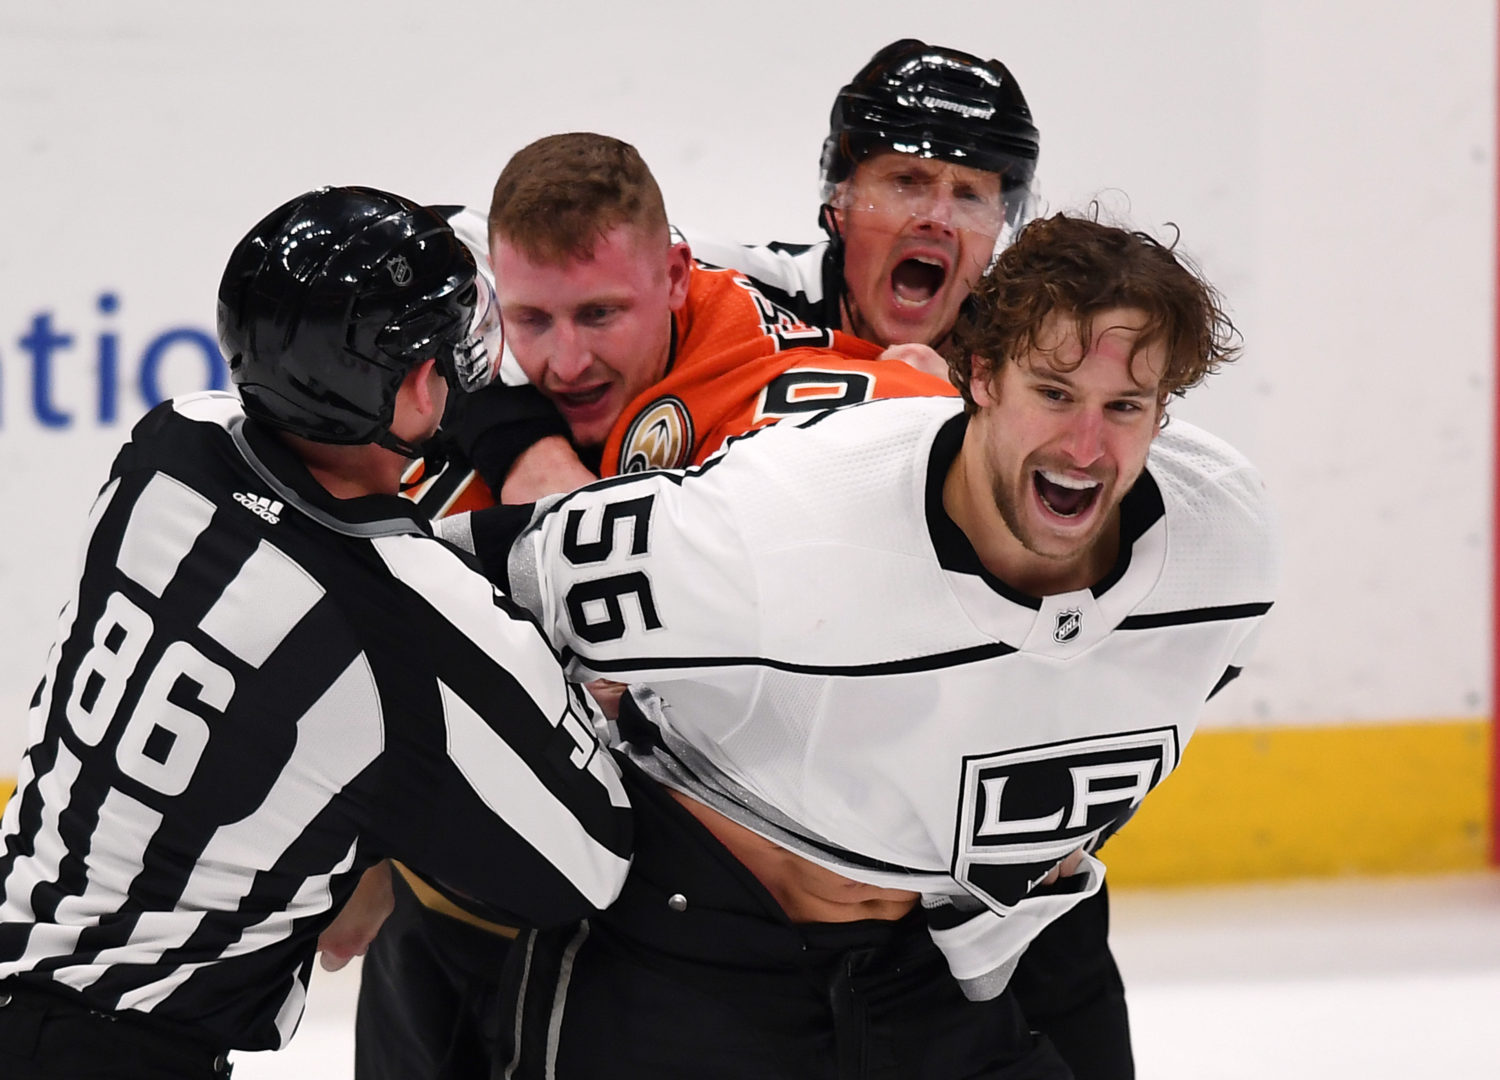 What we learned from the Kings' 4-3 overtime win over the Ducks